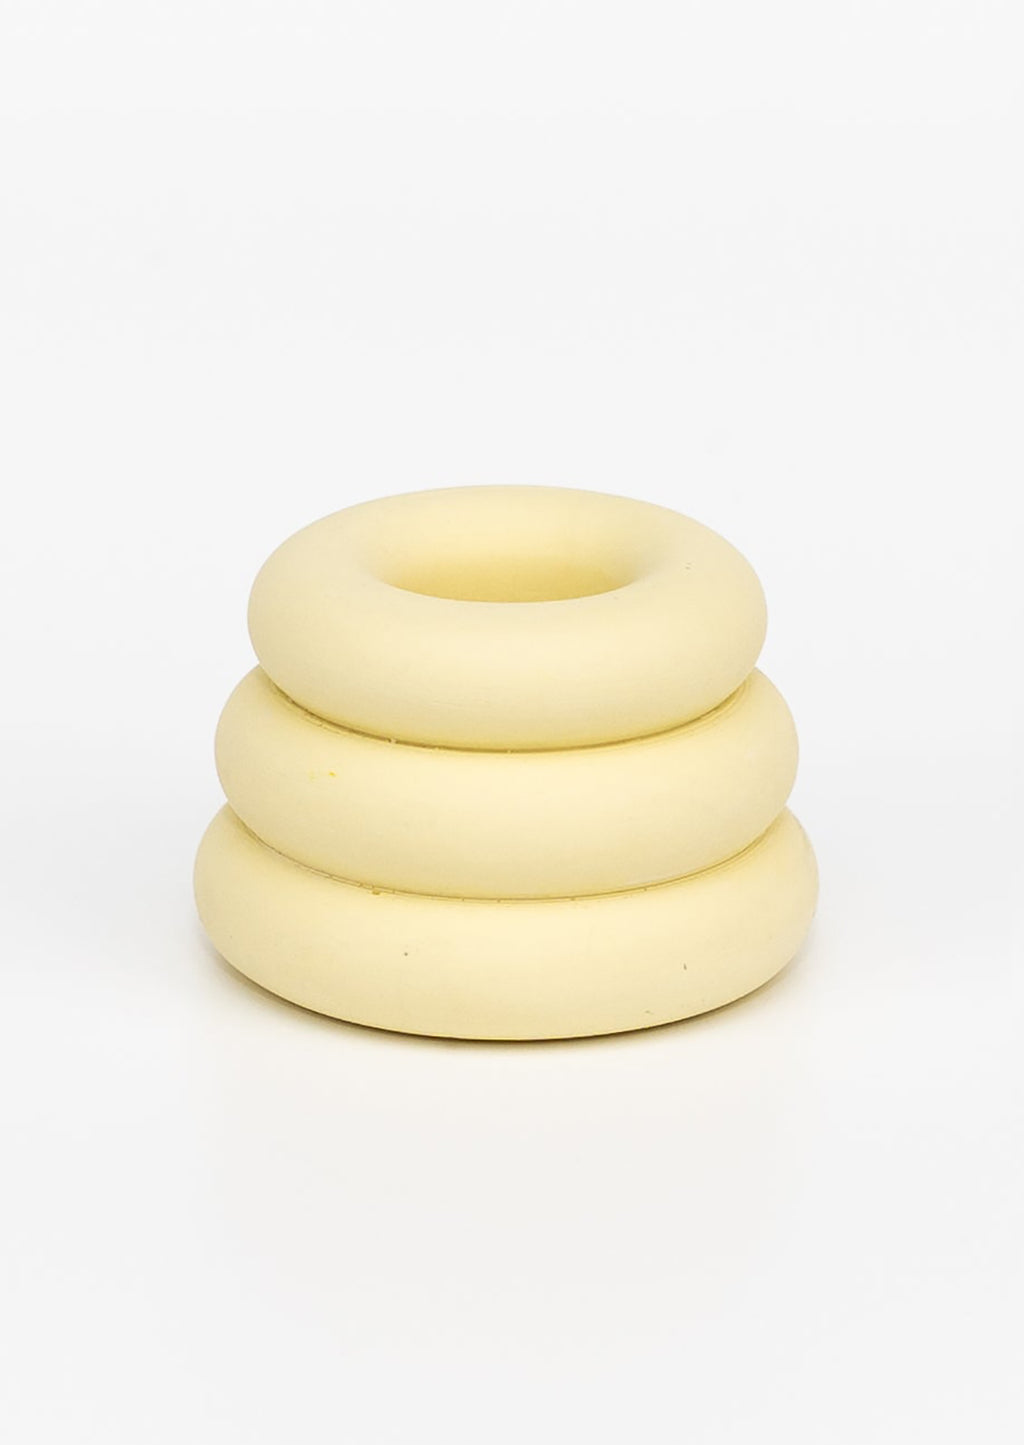 Buttercup: A taper candle holder with 3-layer stacked donut shape in pale yellow.